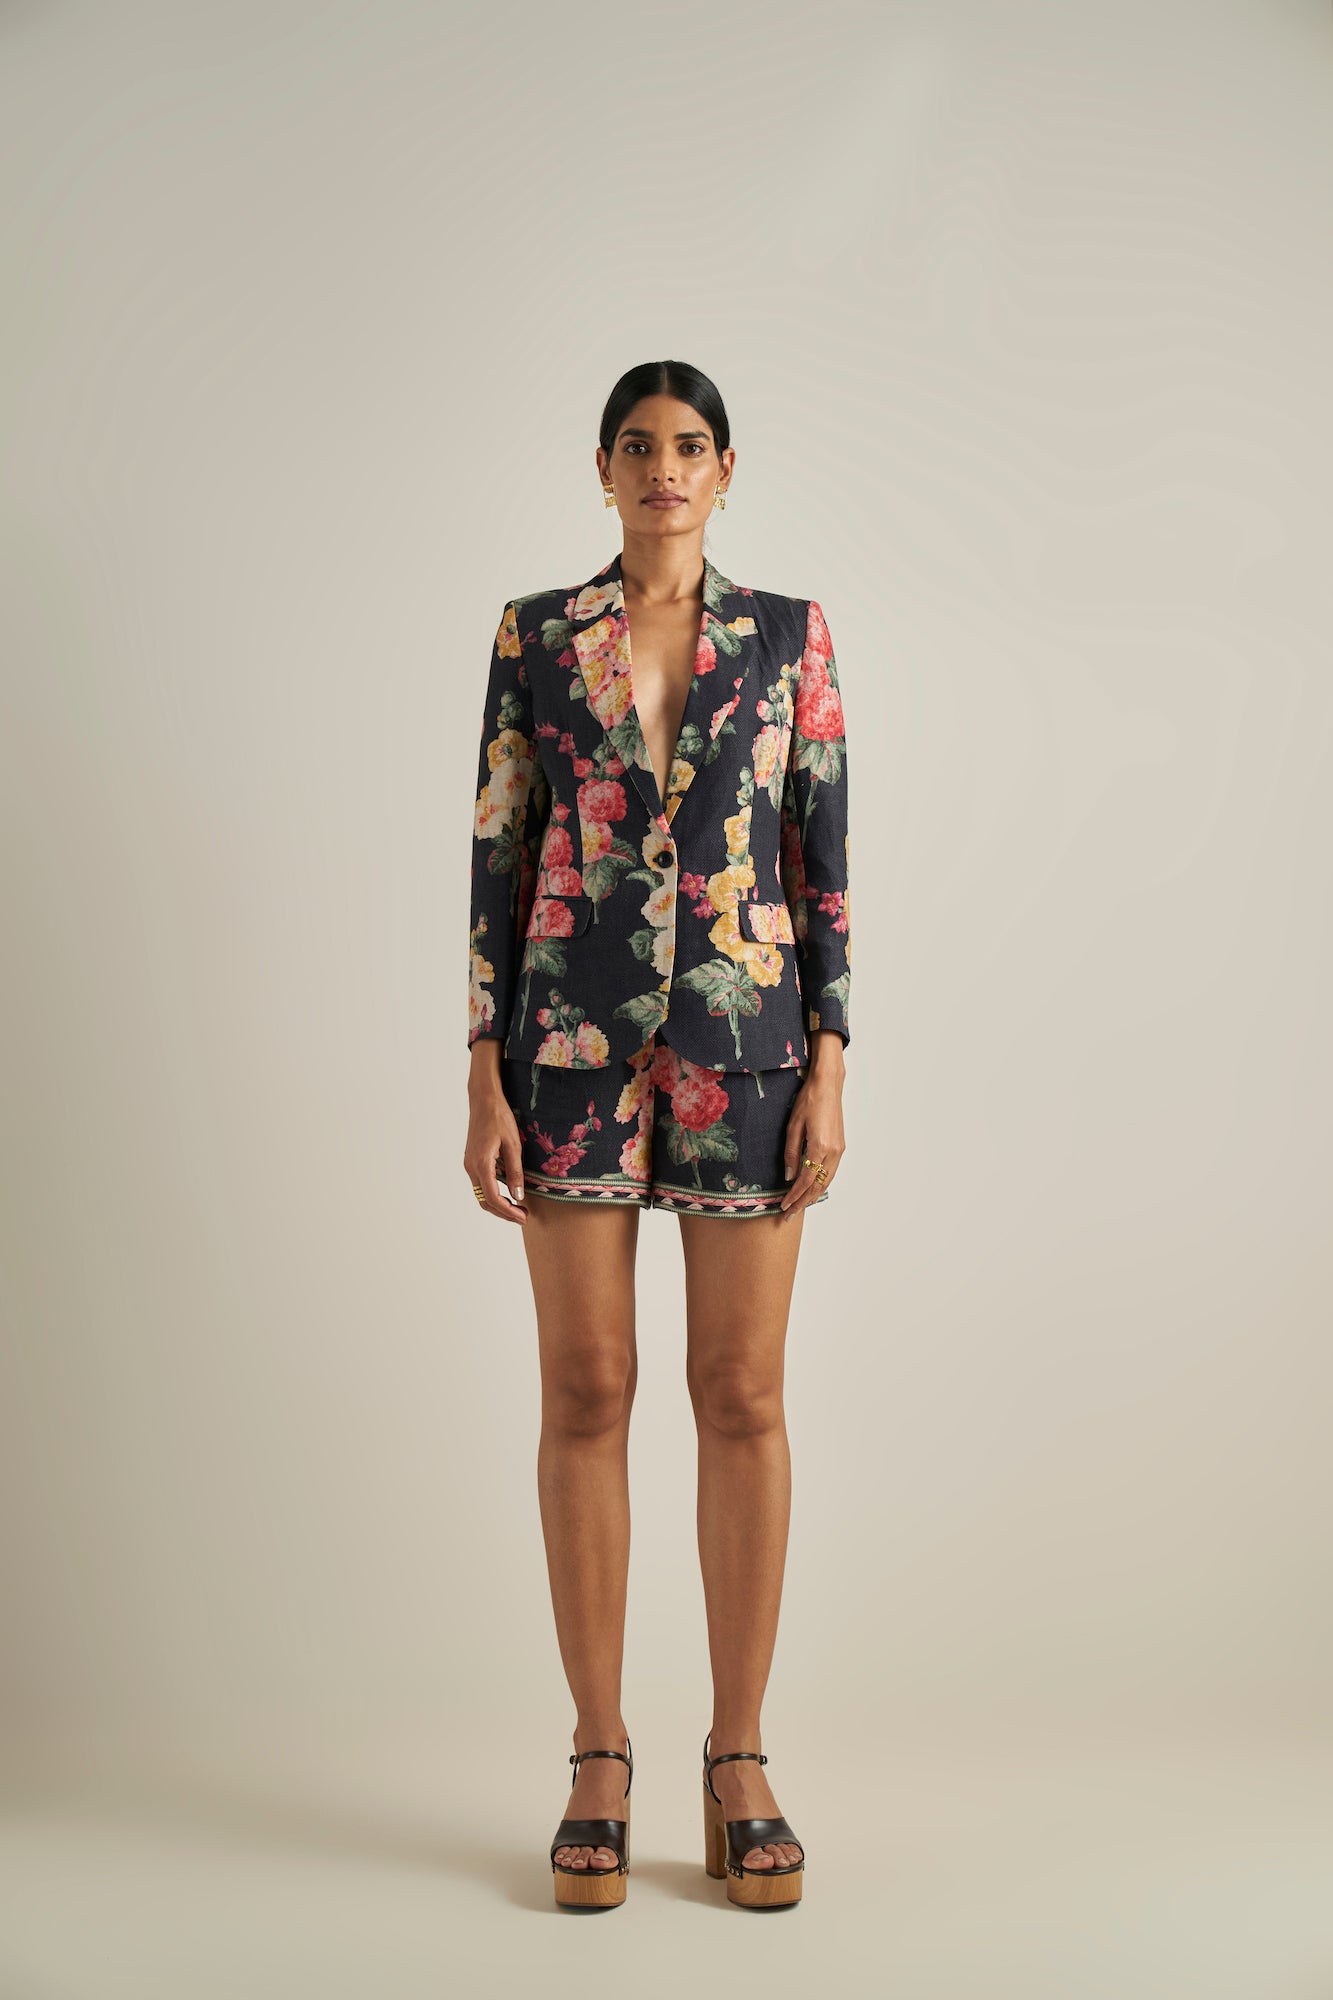 The Estelle Shorts from designer Ranna Gill are a beautiful floral print on black. They have a decorative detailed lining near the hem. Pair with the Janis shirt to complete the set. 